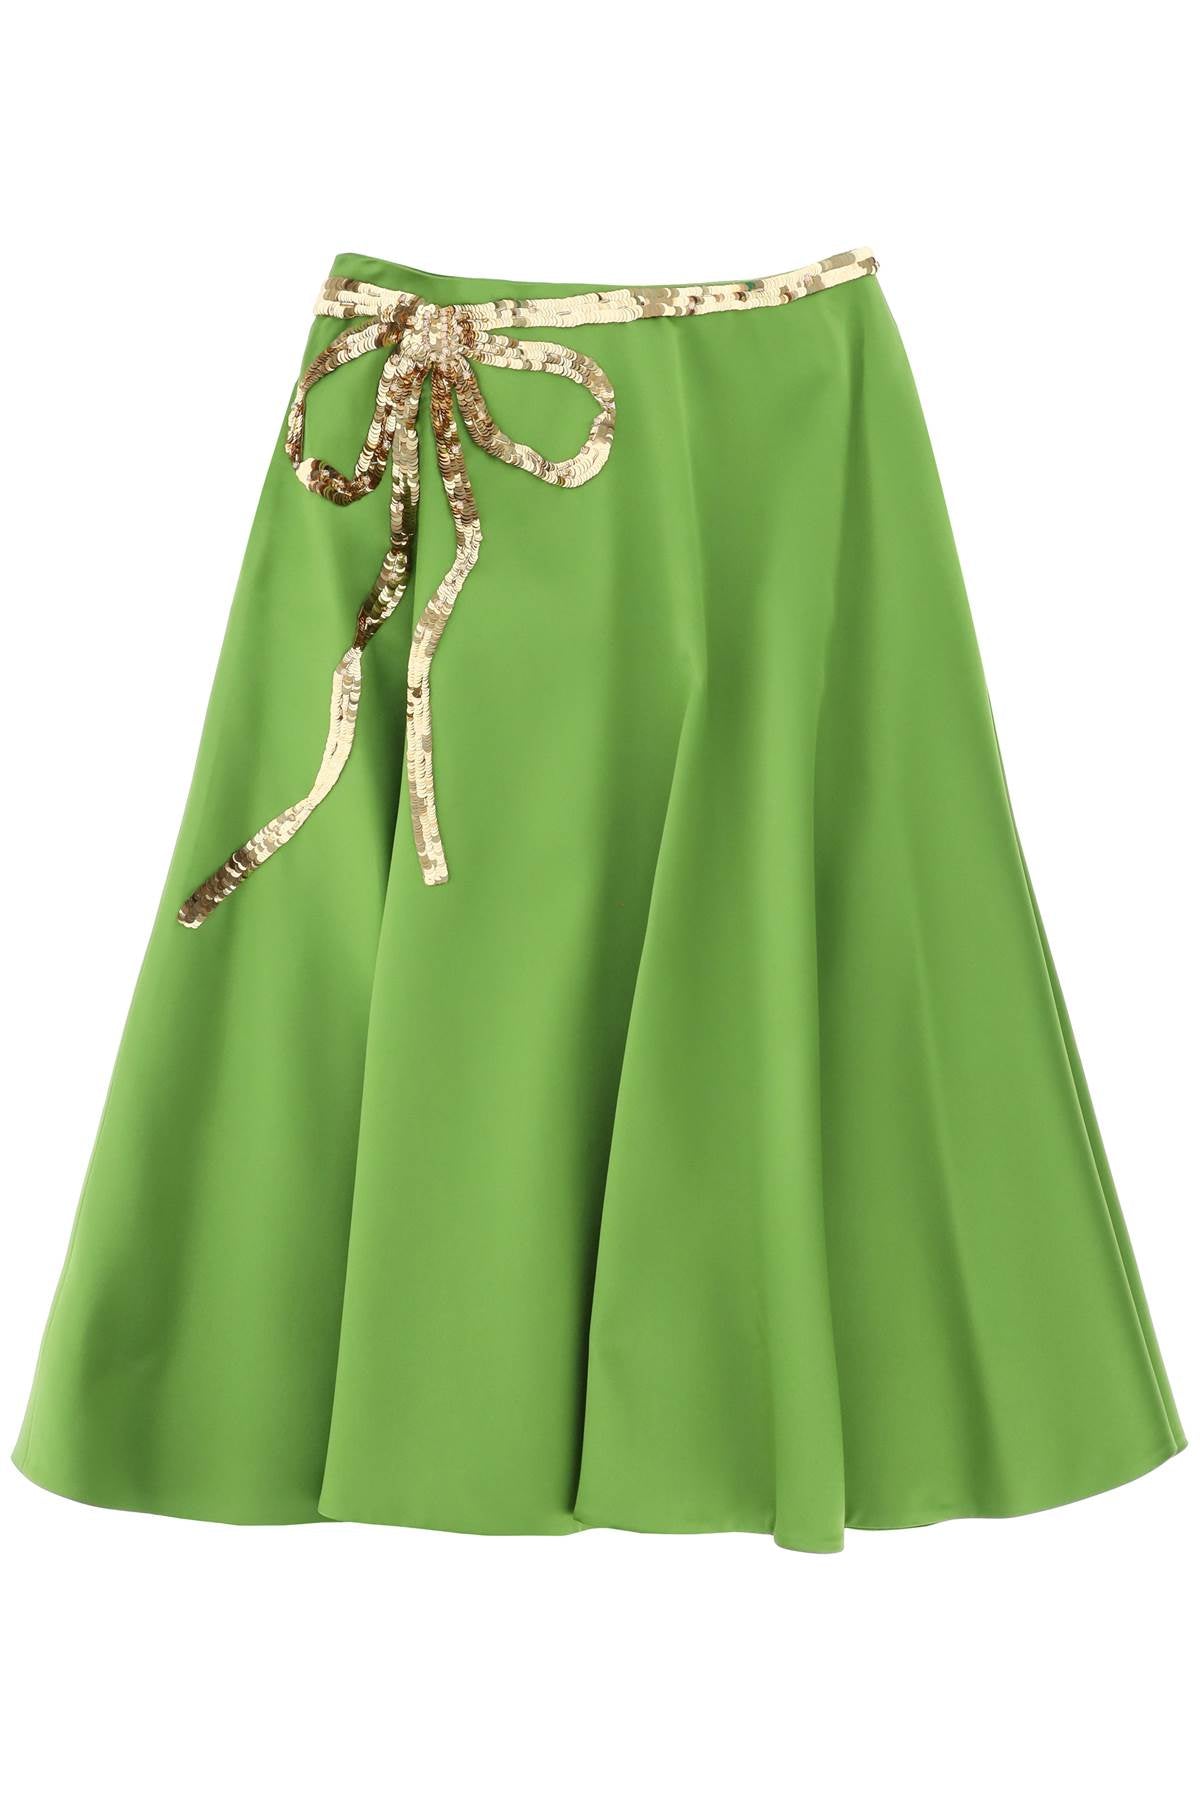 Techno Duchesse A-Line Skirt With Sequin-Studded Bow